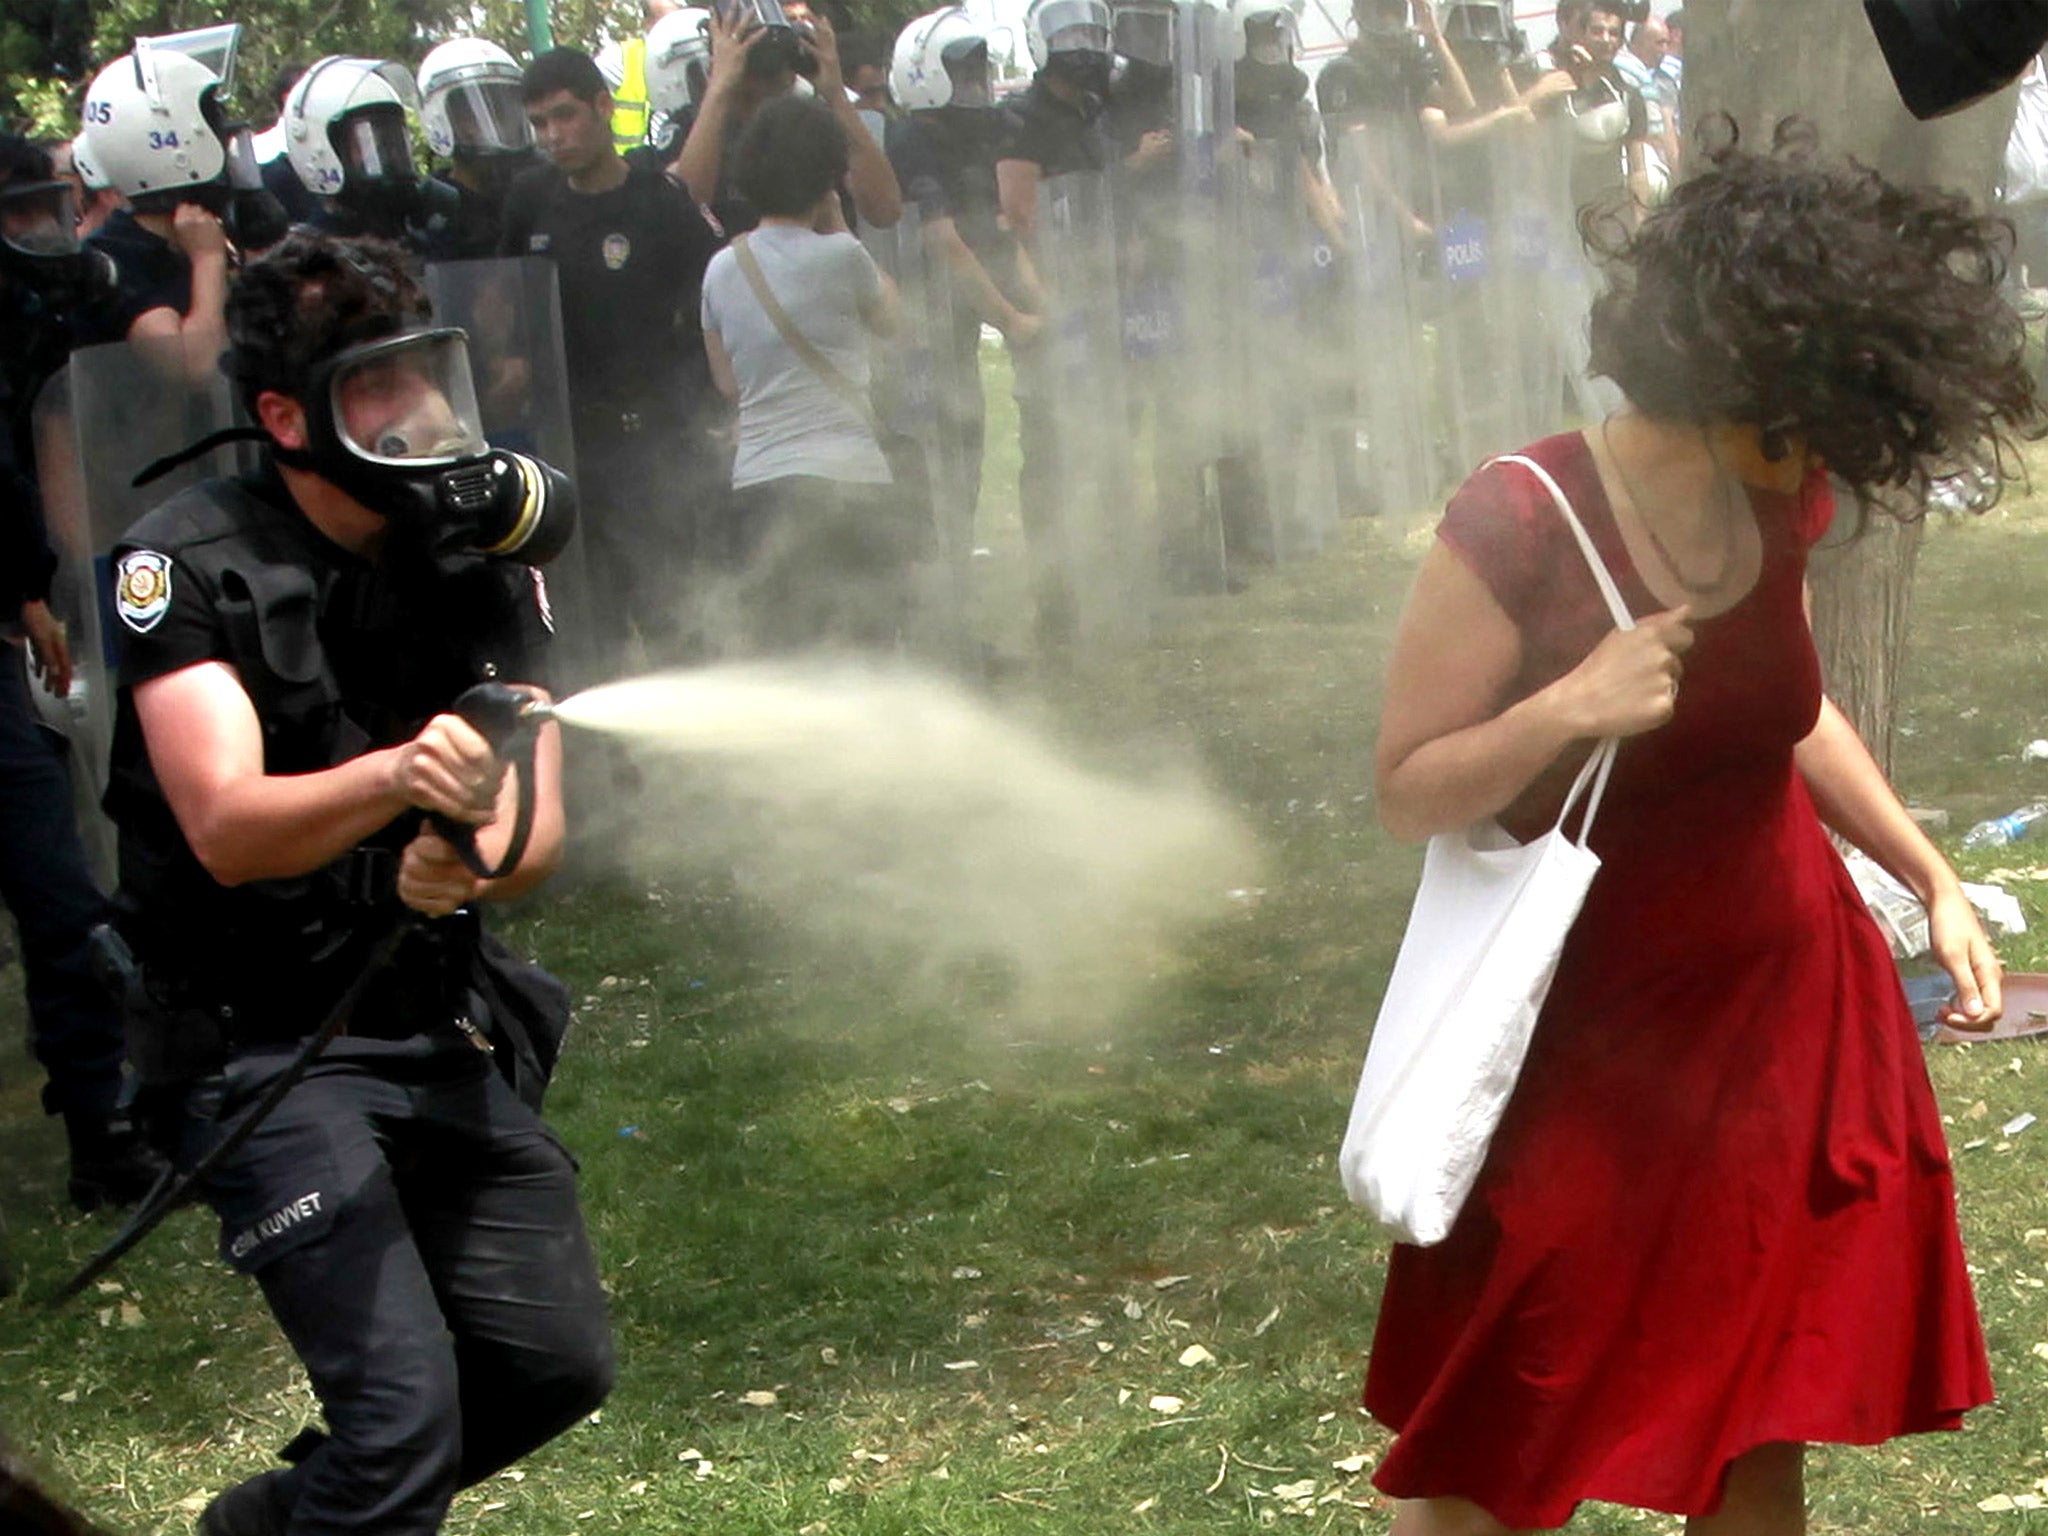 In Istanbul, on 28 May, a similar image showing a 'woman in a red dress', later identified as Ceyda Sungur, being sprayed with tear gas became a focal image of the unrest in Turkey